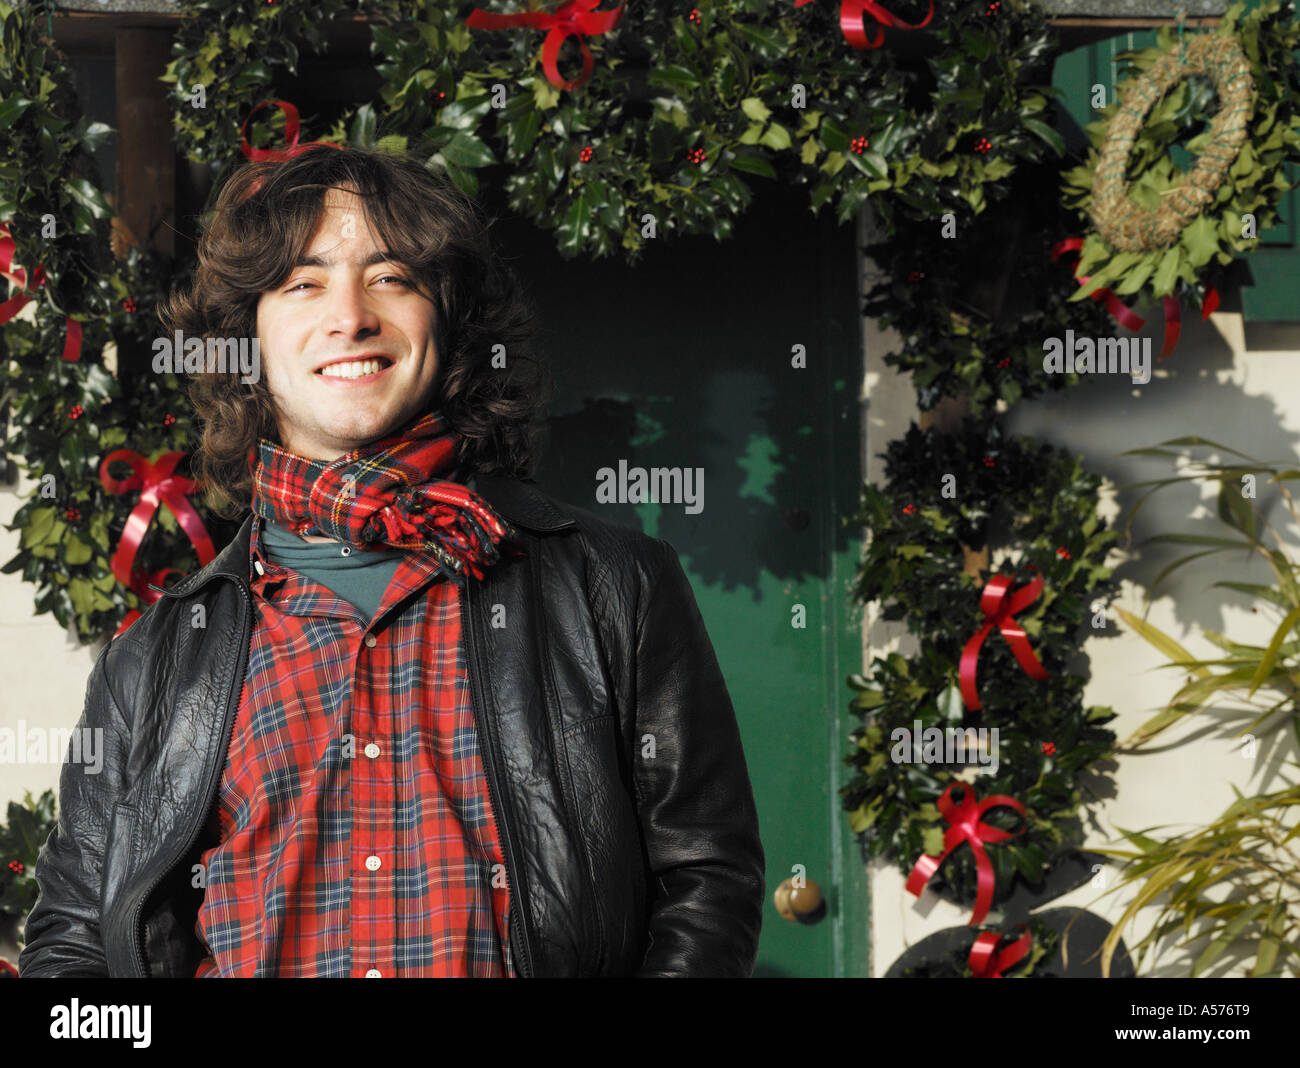 Young man outside with natural christmas decorations Stock Photo